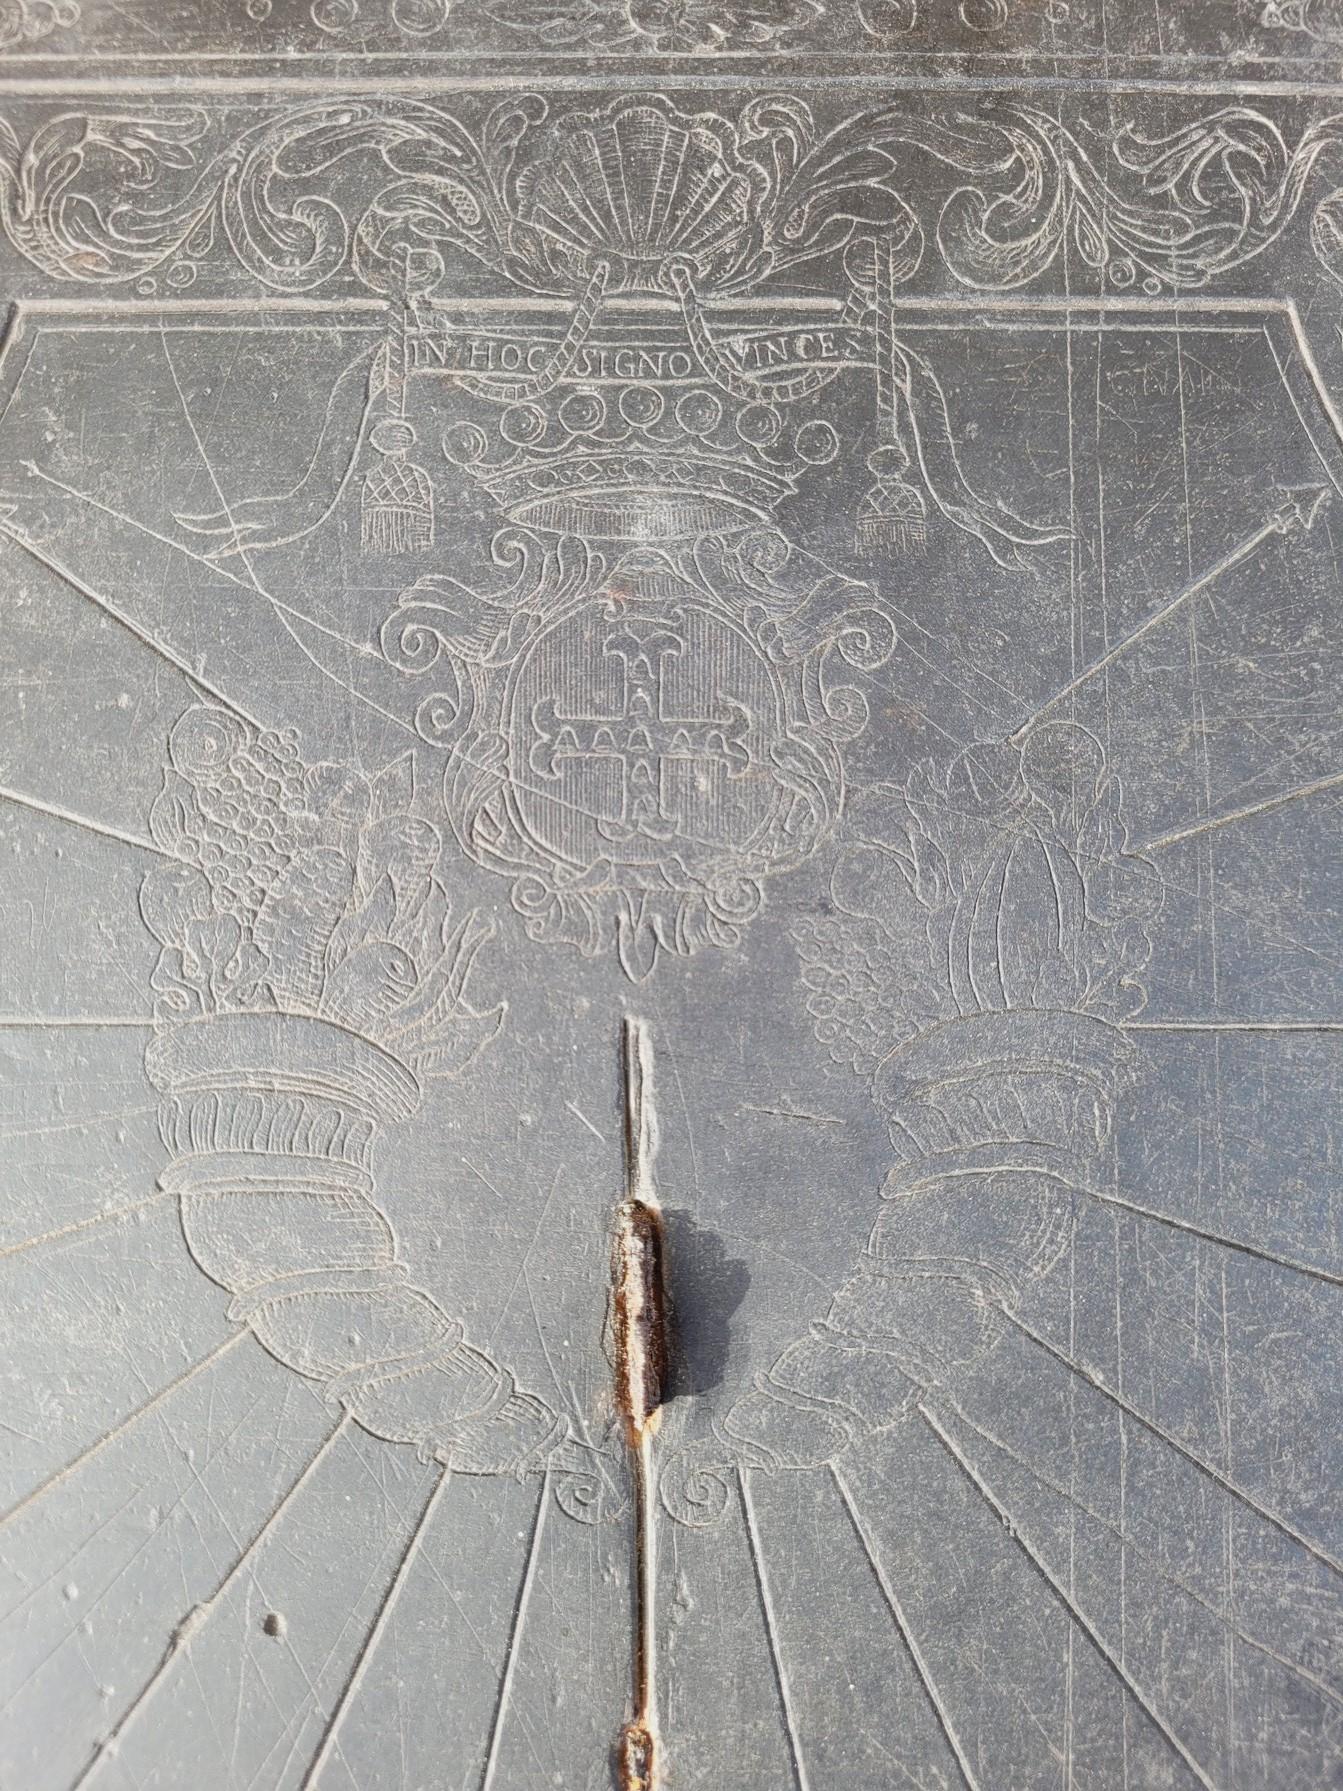 Slate sundial engraved and decorated with cornucopias, shells and a crown topped with the motto 